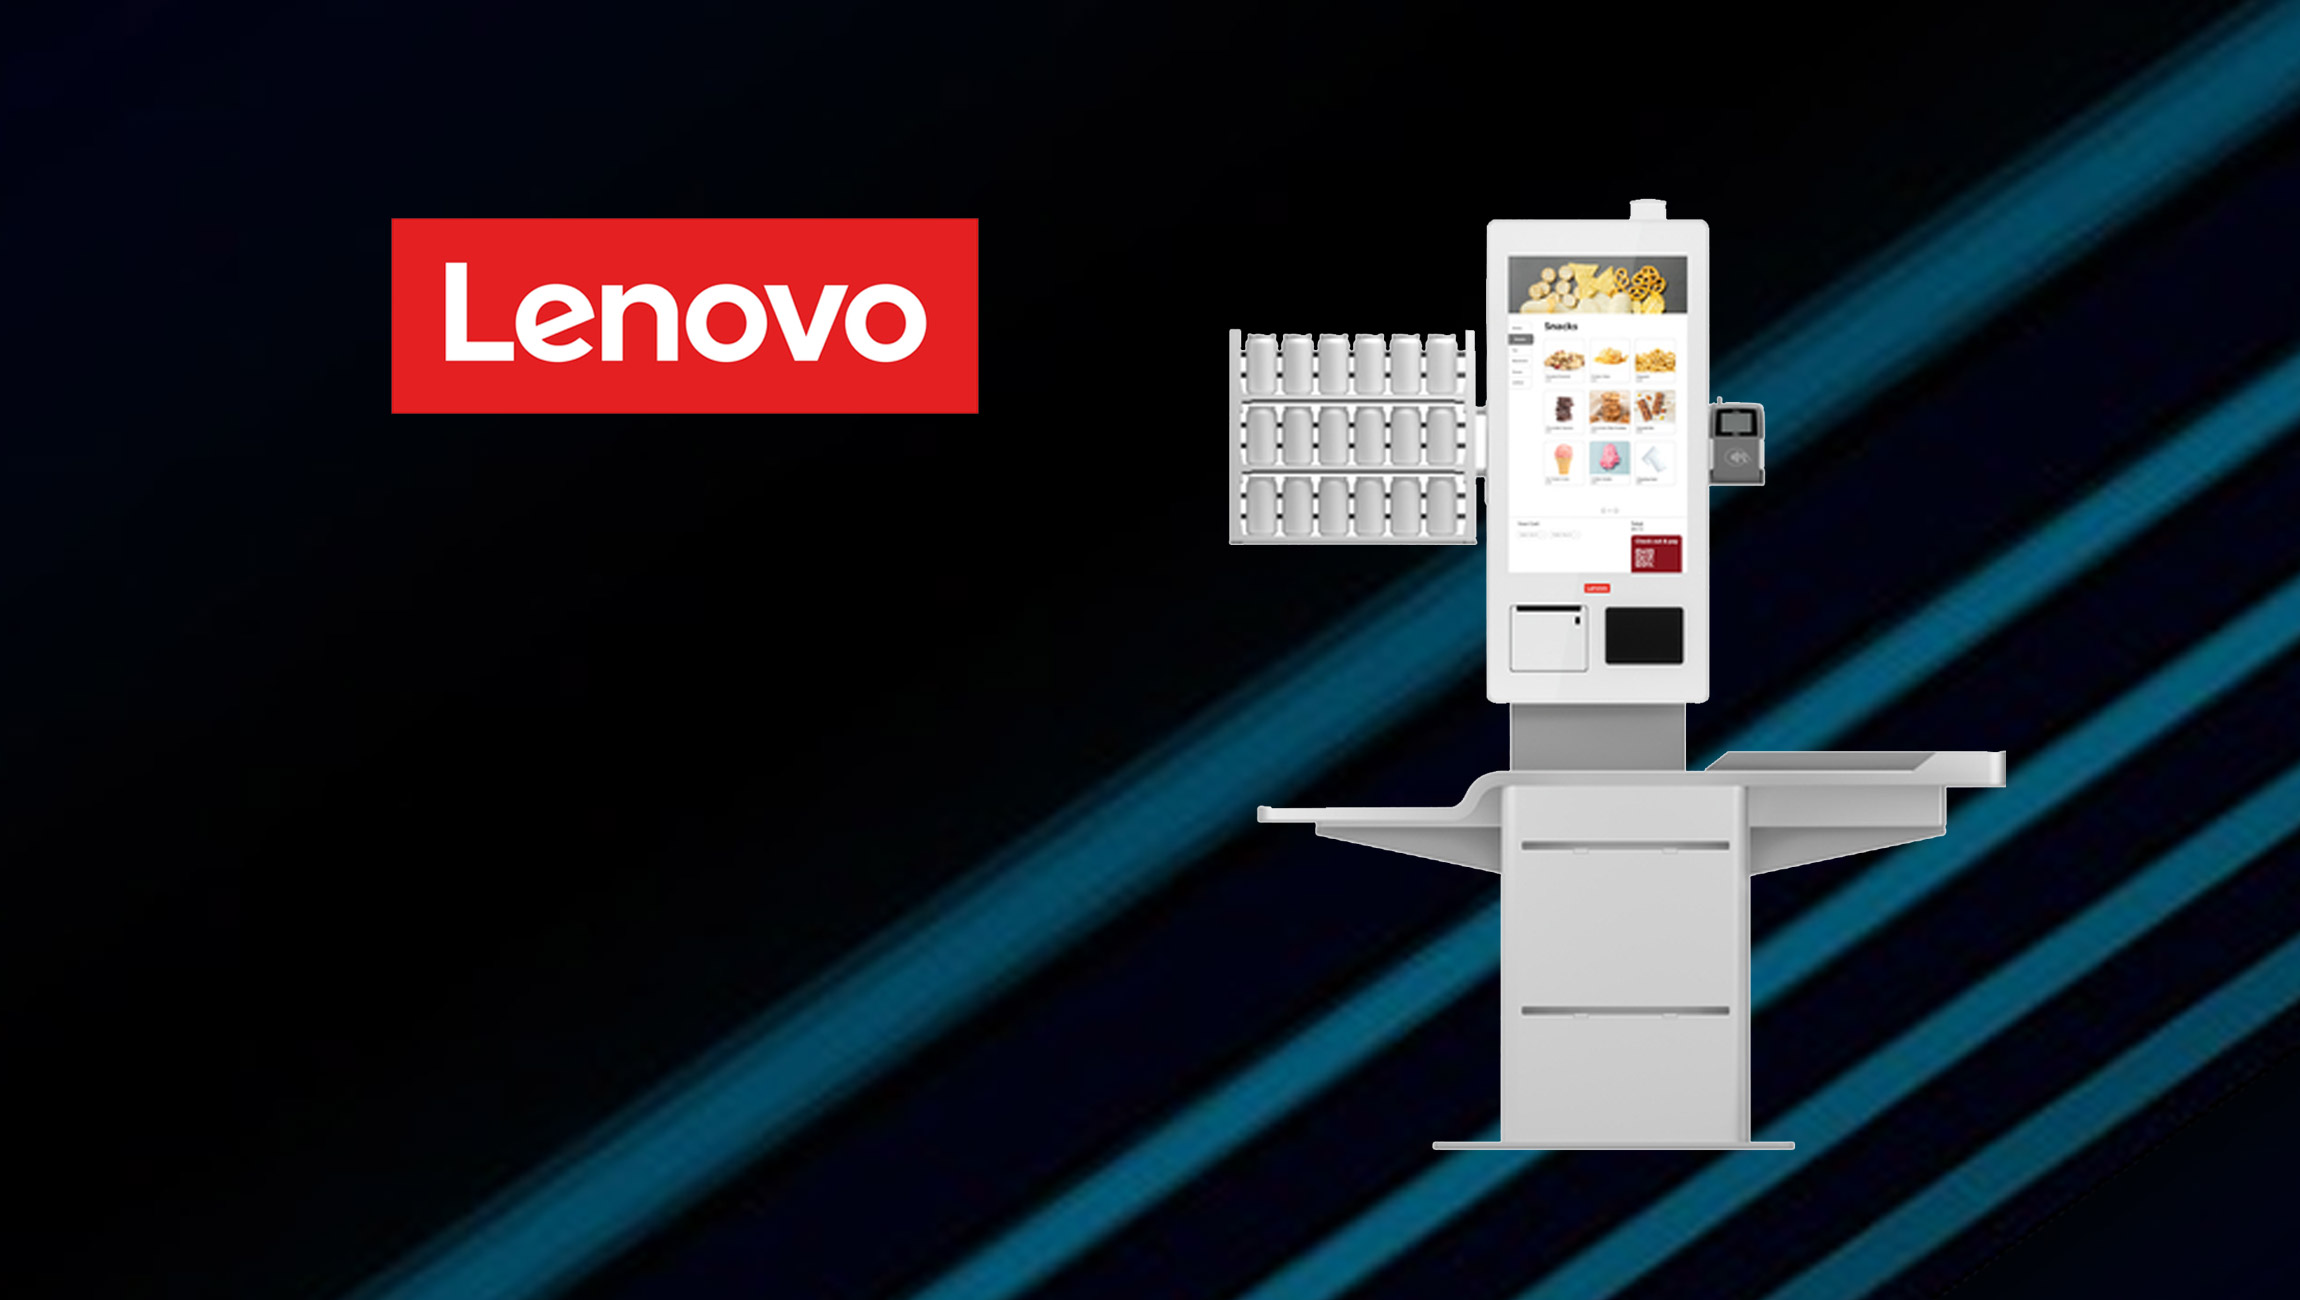 Lenovo’s Retail Portfolio Delivers End-to-End and Intuitive Customer Experiences